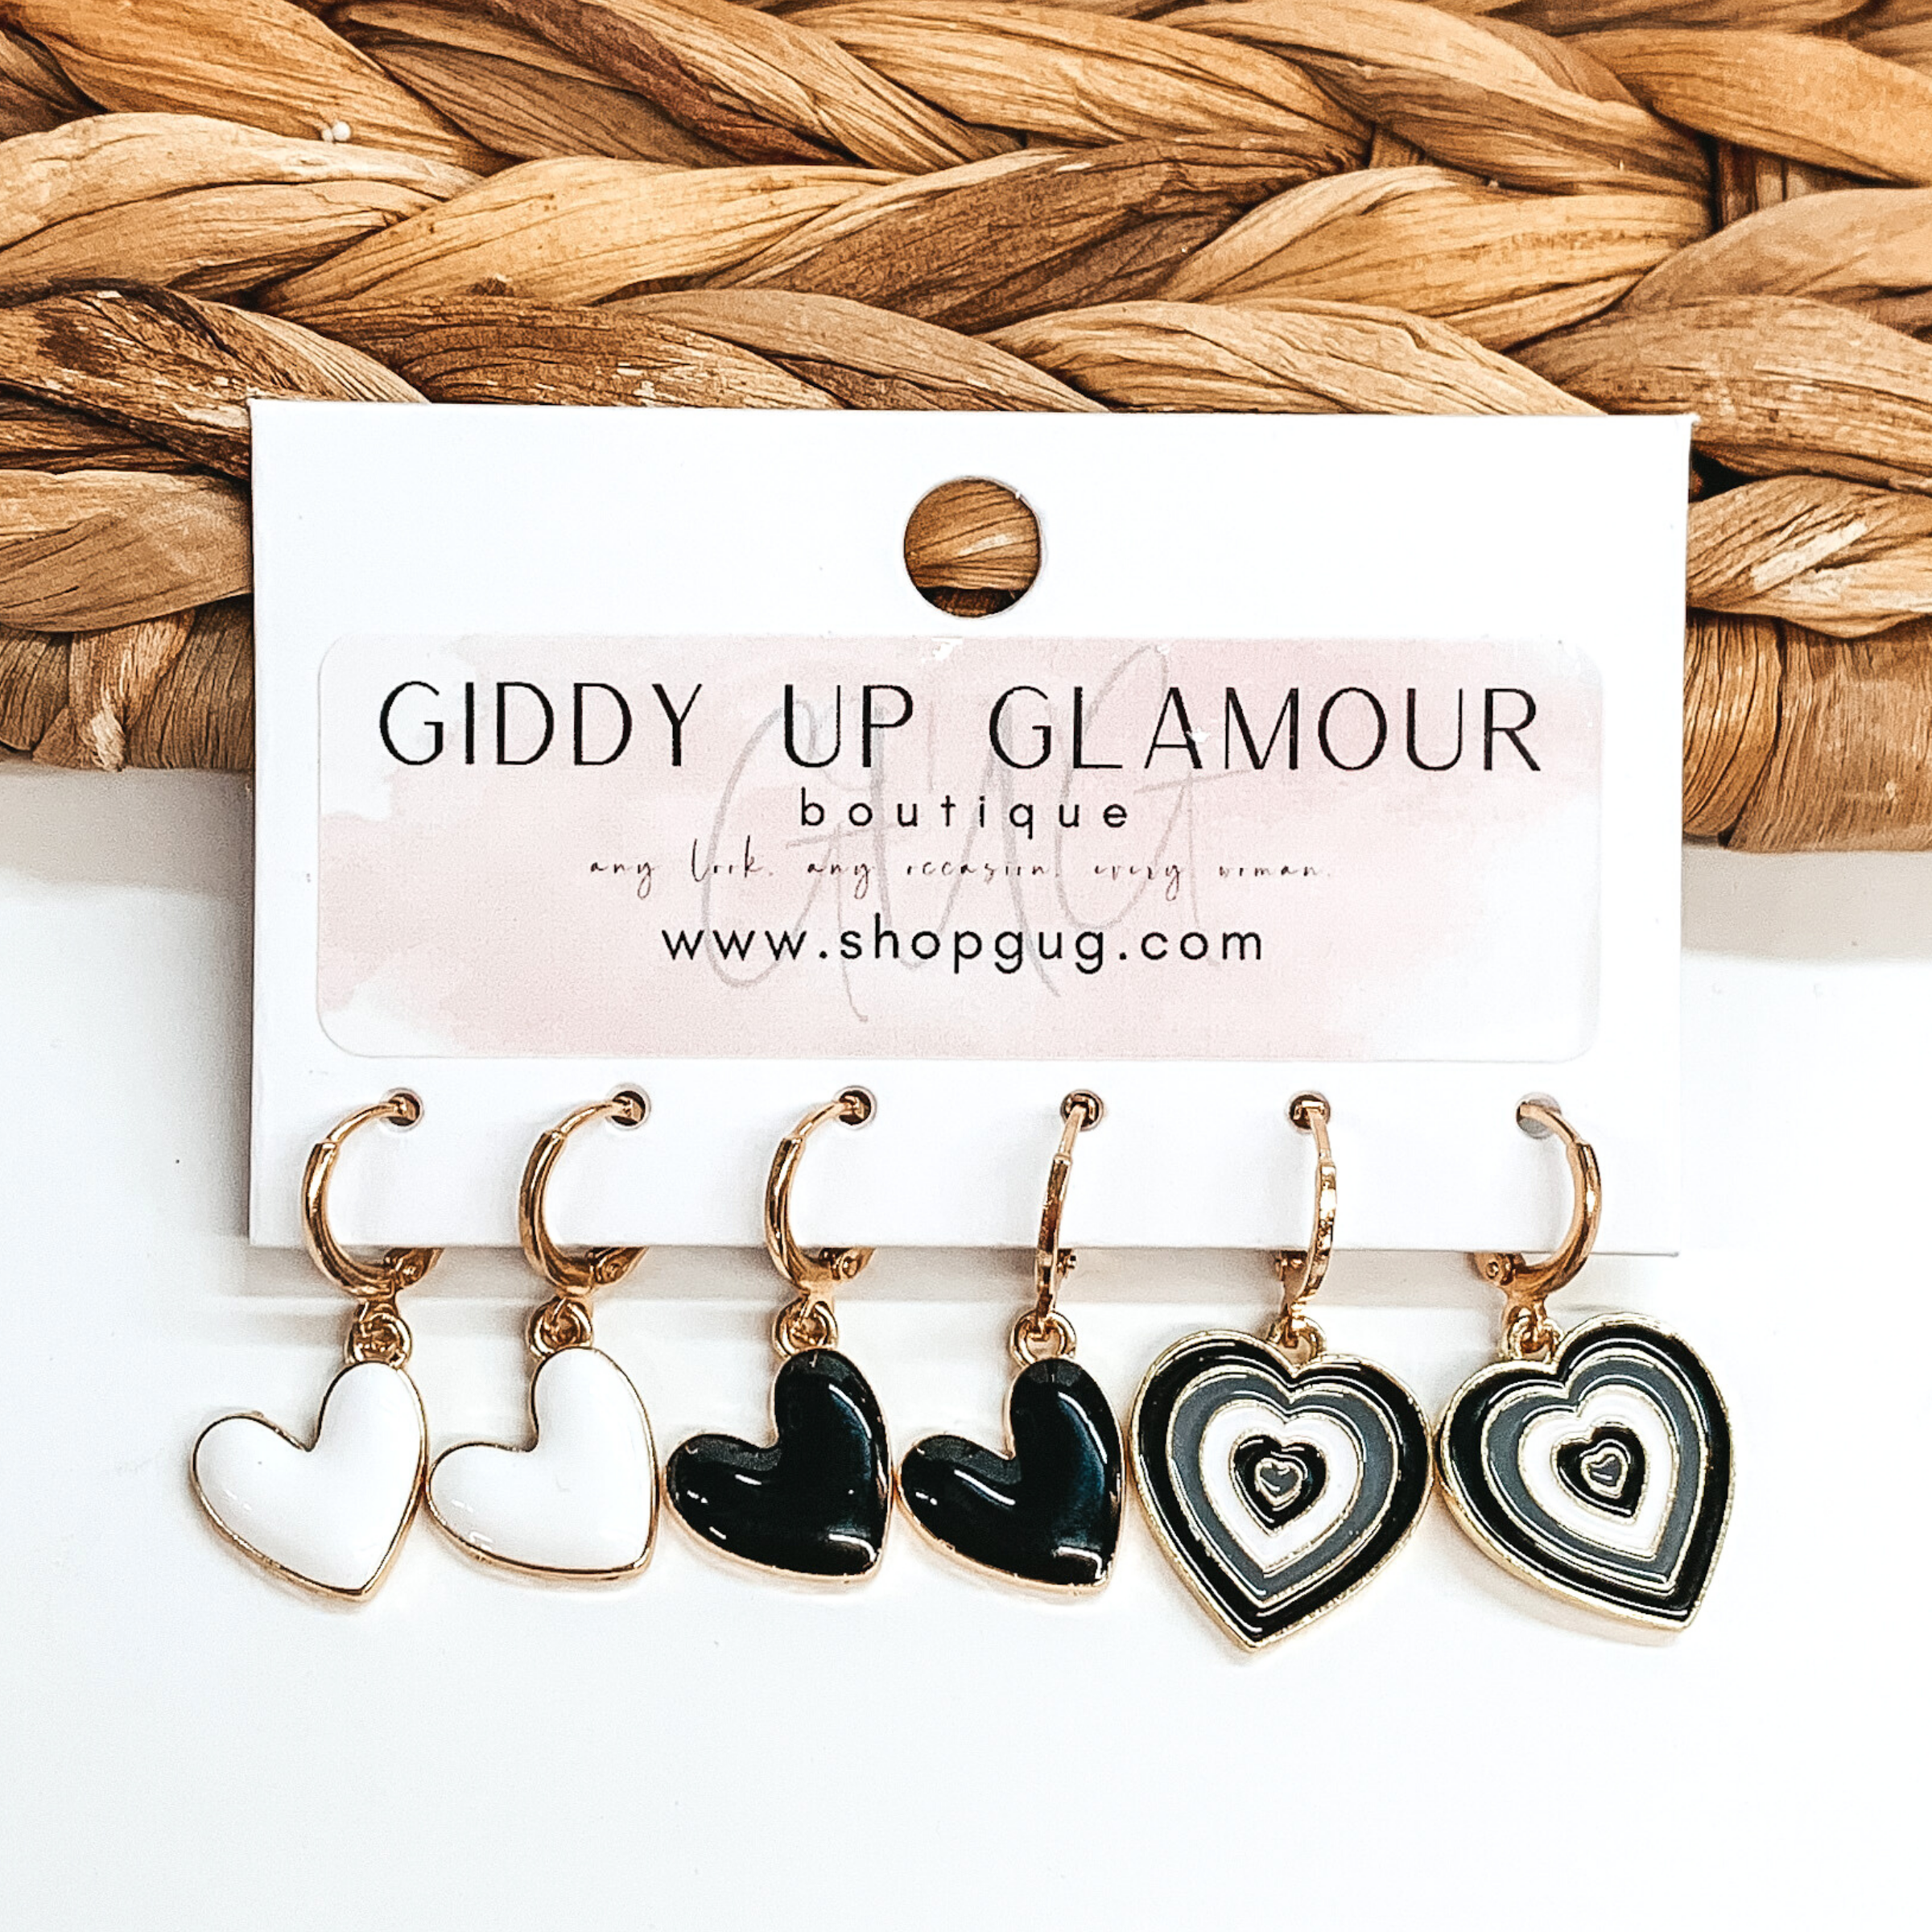 Set of three gold hoop earrings that have heart pendants hanging. the pendants include white hearts, black hearts, and heart pendants that have layers in black and white. These earrings are pictured on a white card holder on a white background with basket weave in the background.